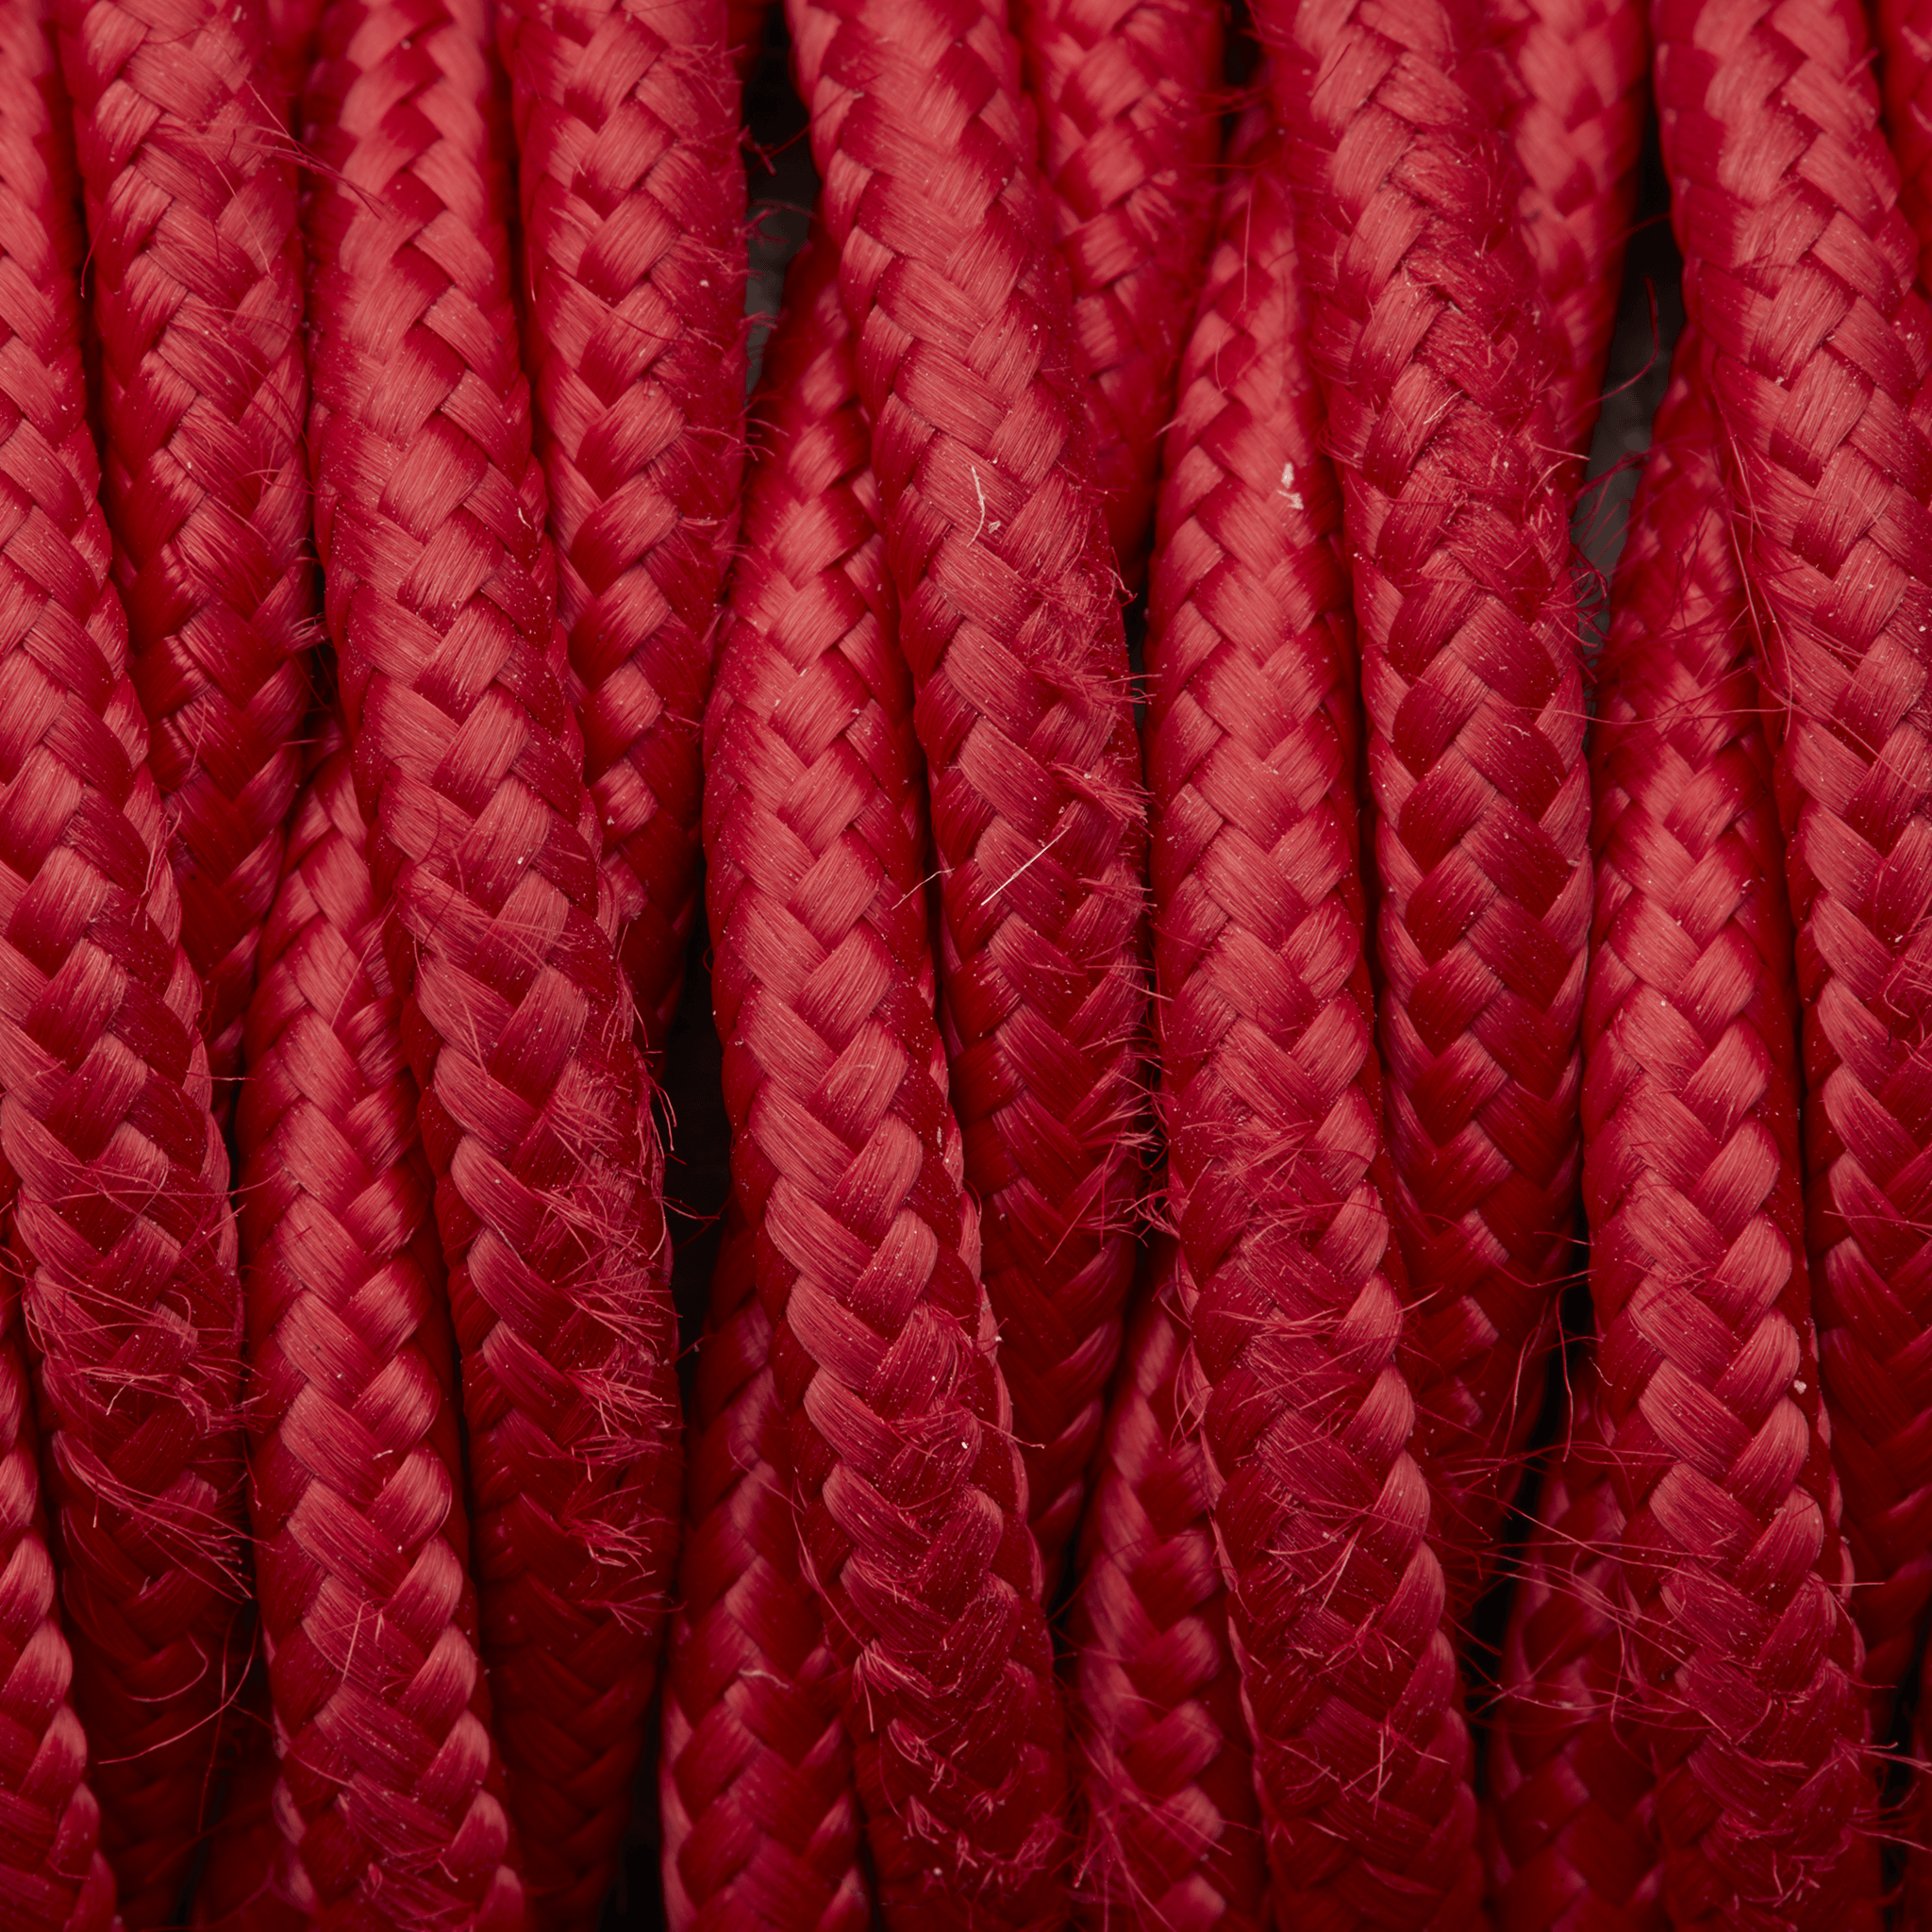 Industville – Twisted Fabric Flex – 3 Core Braided Cloth Cable Lighting Wire – Fabric Flex Cable – Red Colour – Braided Woven Cloth Material – 100 CM